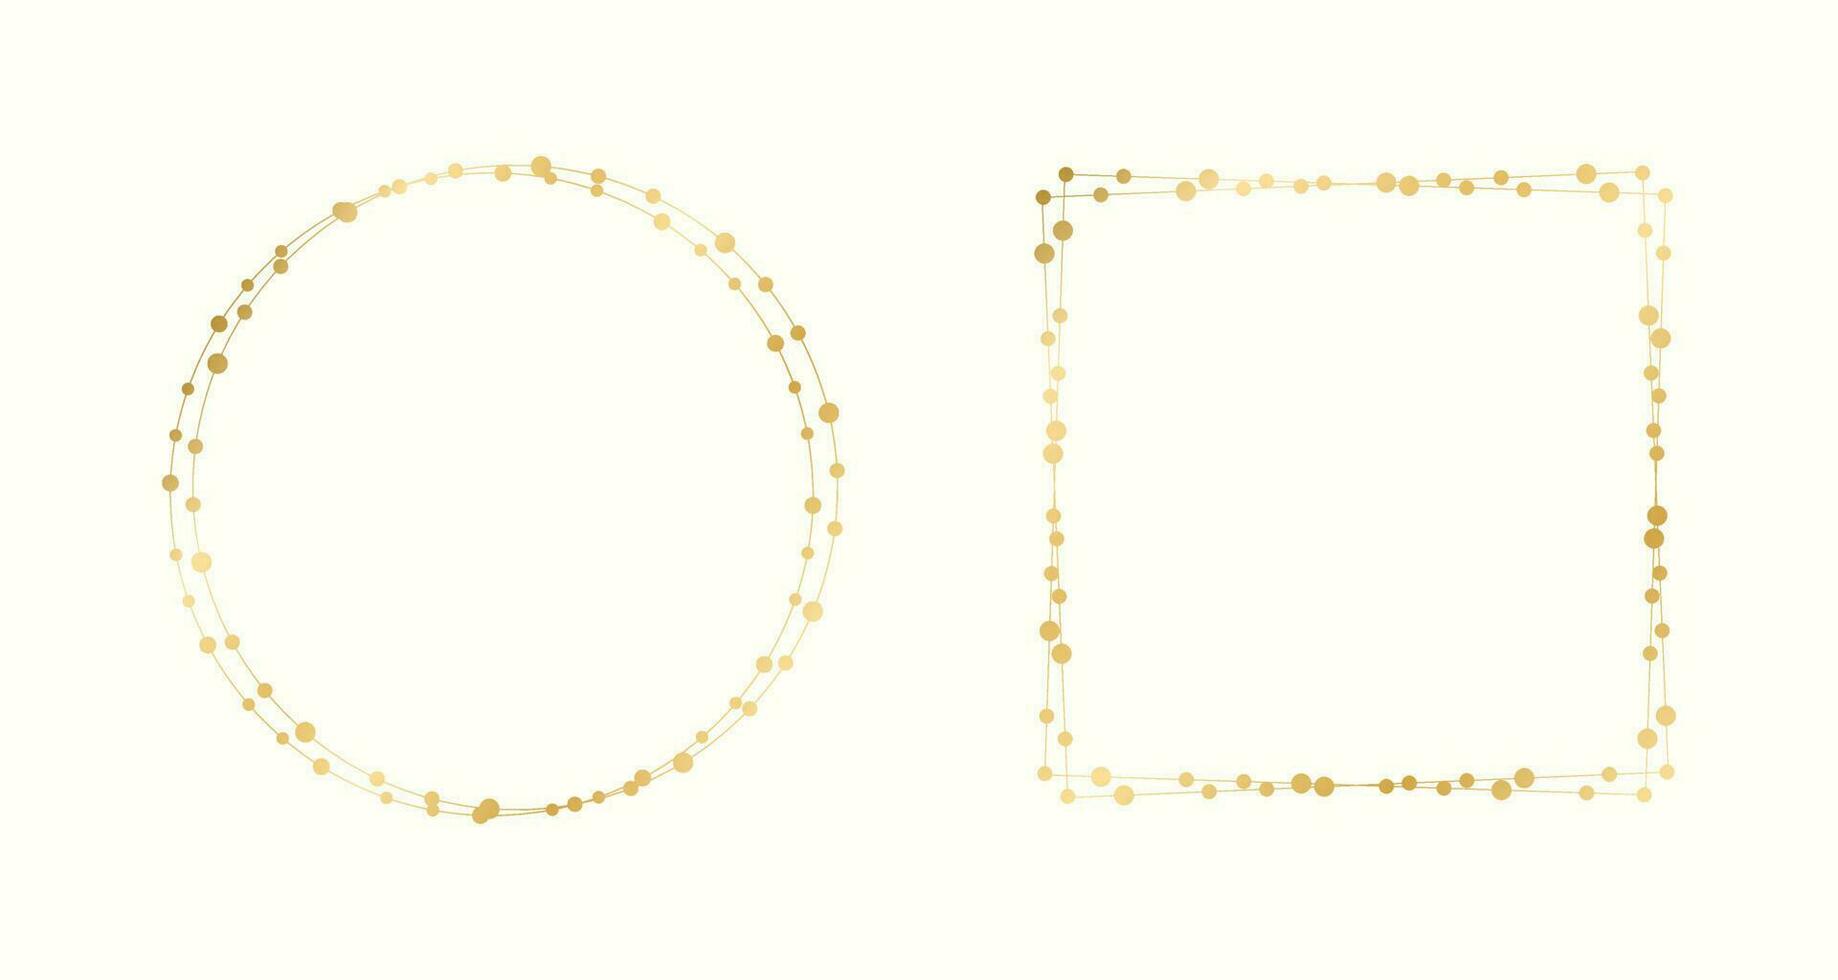 Gold Christmas Fairy Lights Frame Border Set. Abstract geometric golden dots circle frame collection. vector